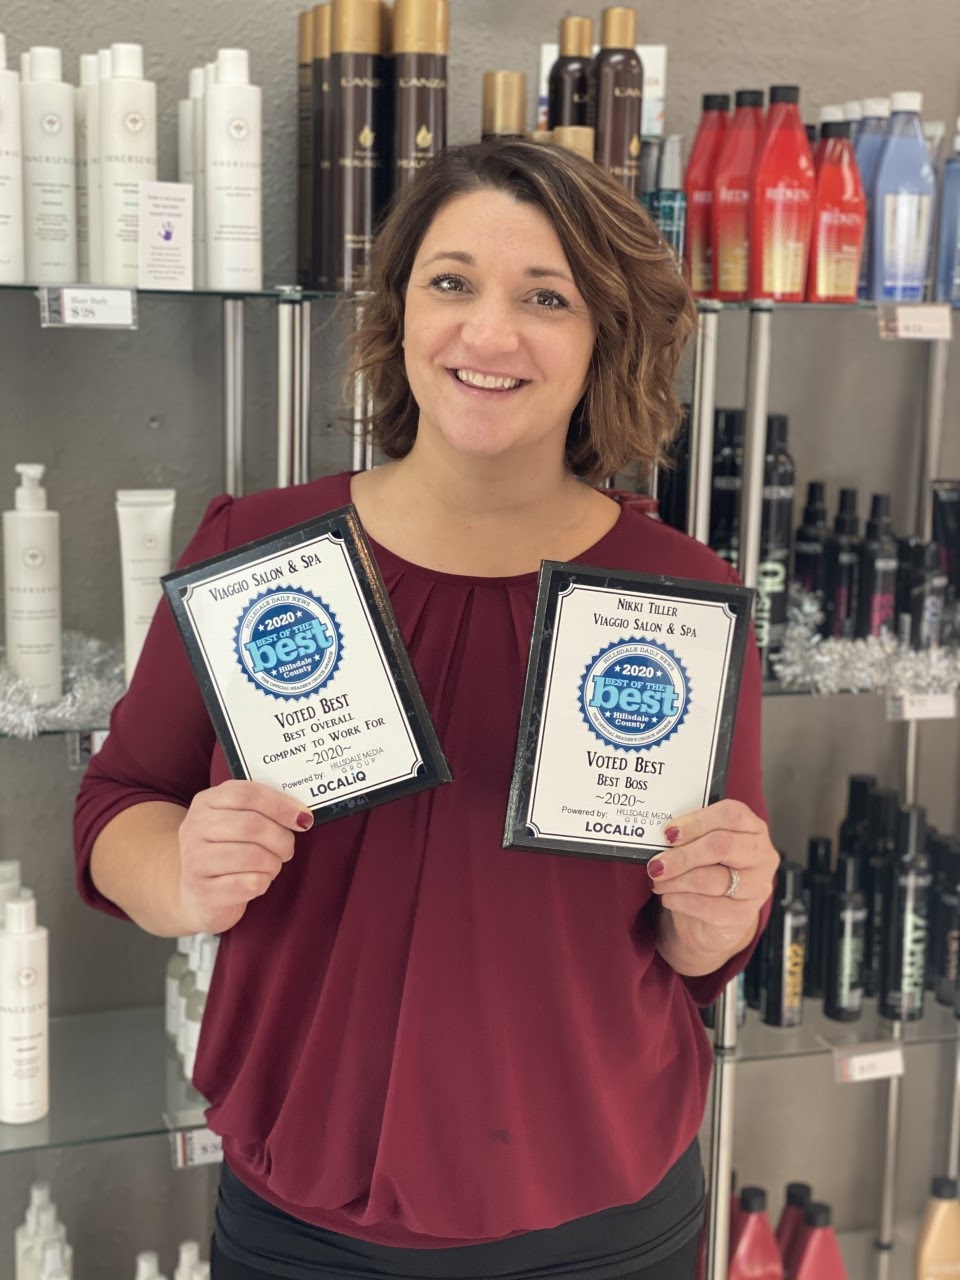 Hillsdale hairstylist wins three awards in annual competition